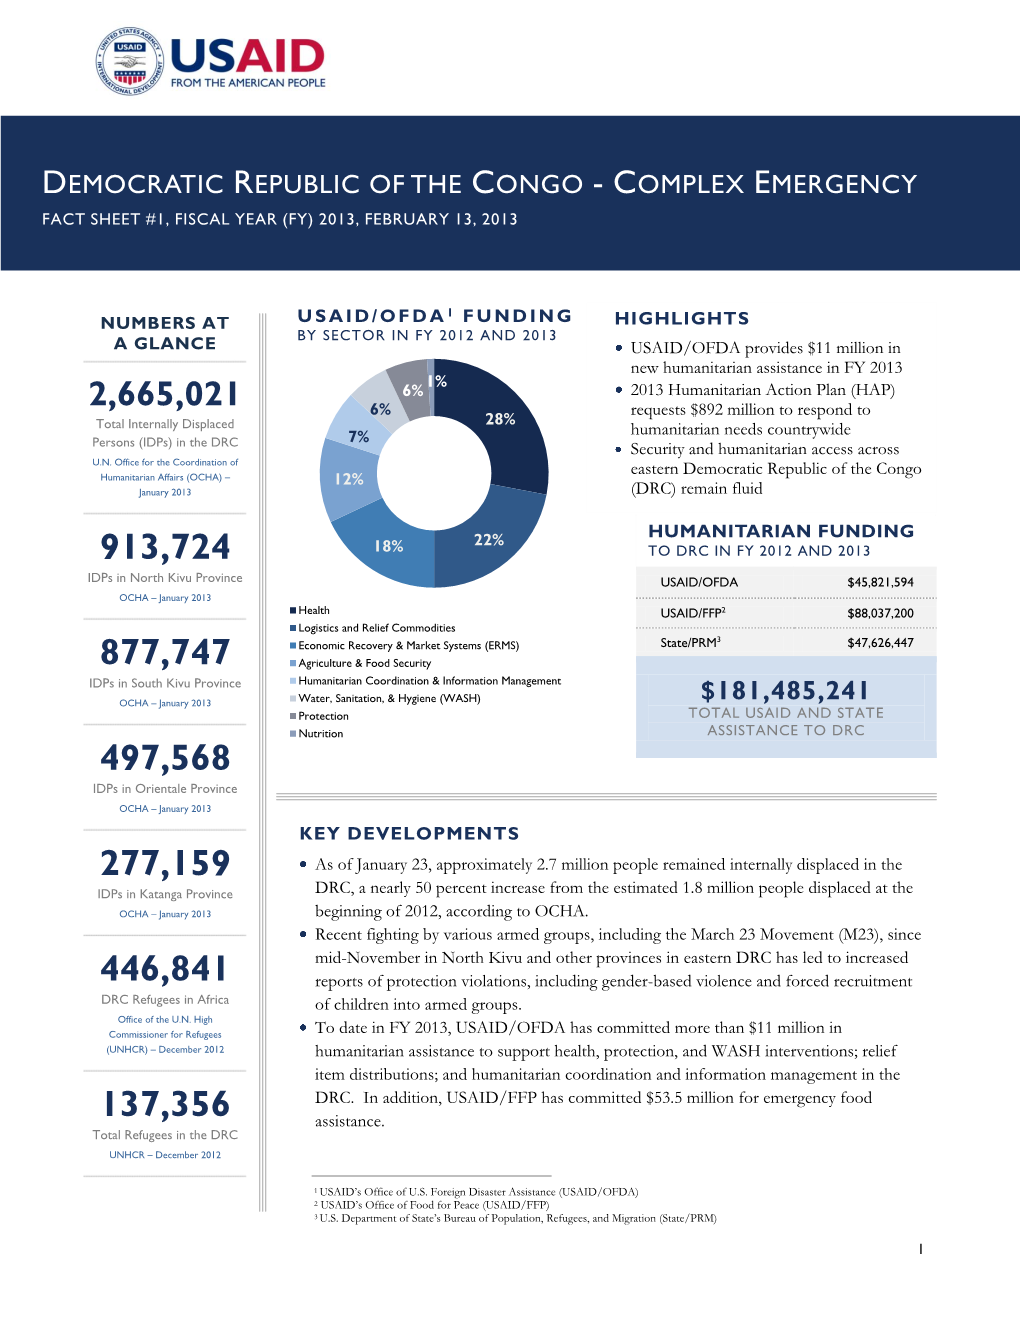 Complex Emergency Fact Sheet #1, Fiscal Year (Fy) 2013, February 13, 2013